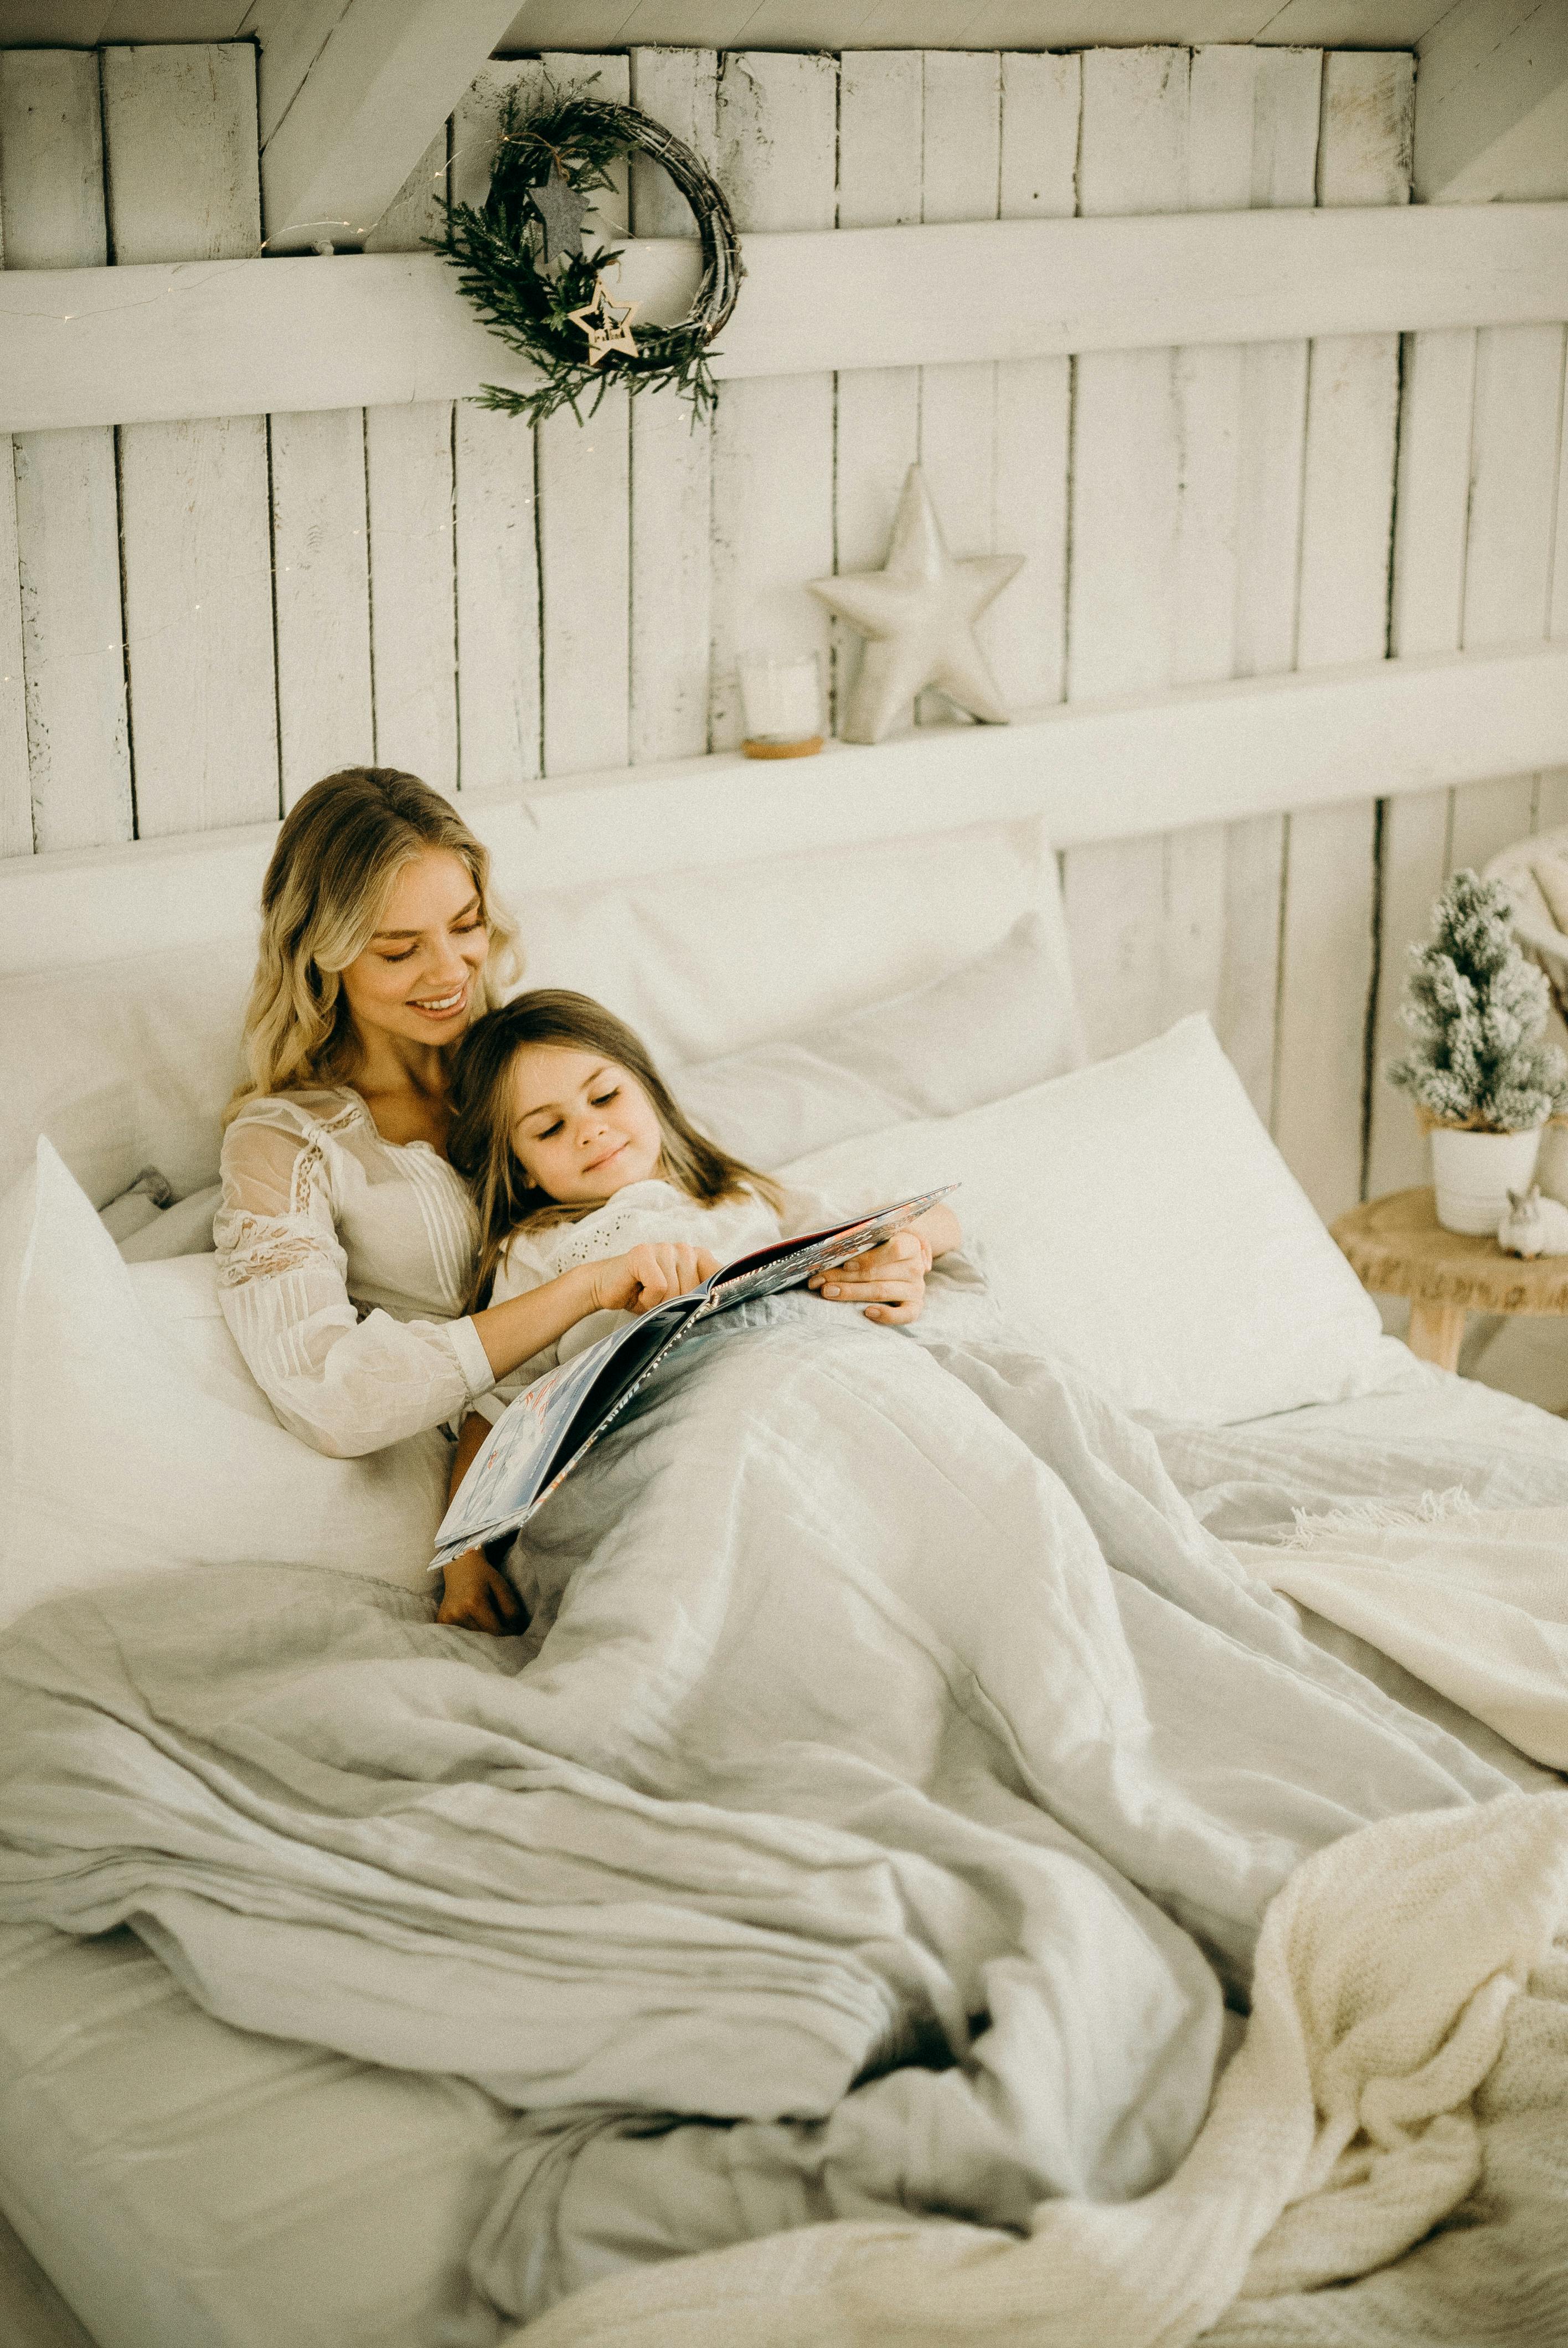 Ahh Sleep - Mother reading a story with her daughter while lying in a cozy bed. Room decorated in a farm rustic white with light bedding. AhSleep, Ahh sleep, sleep ahh